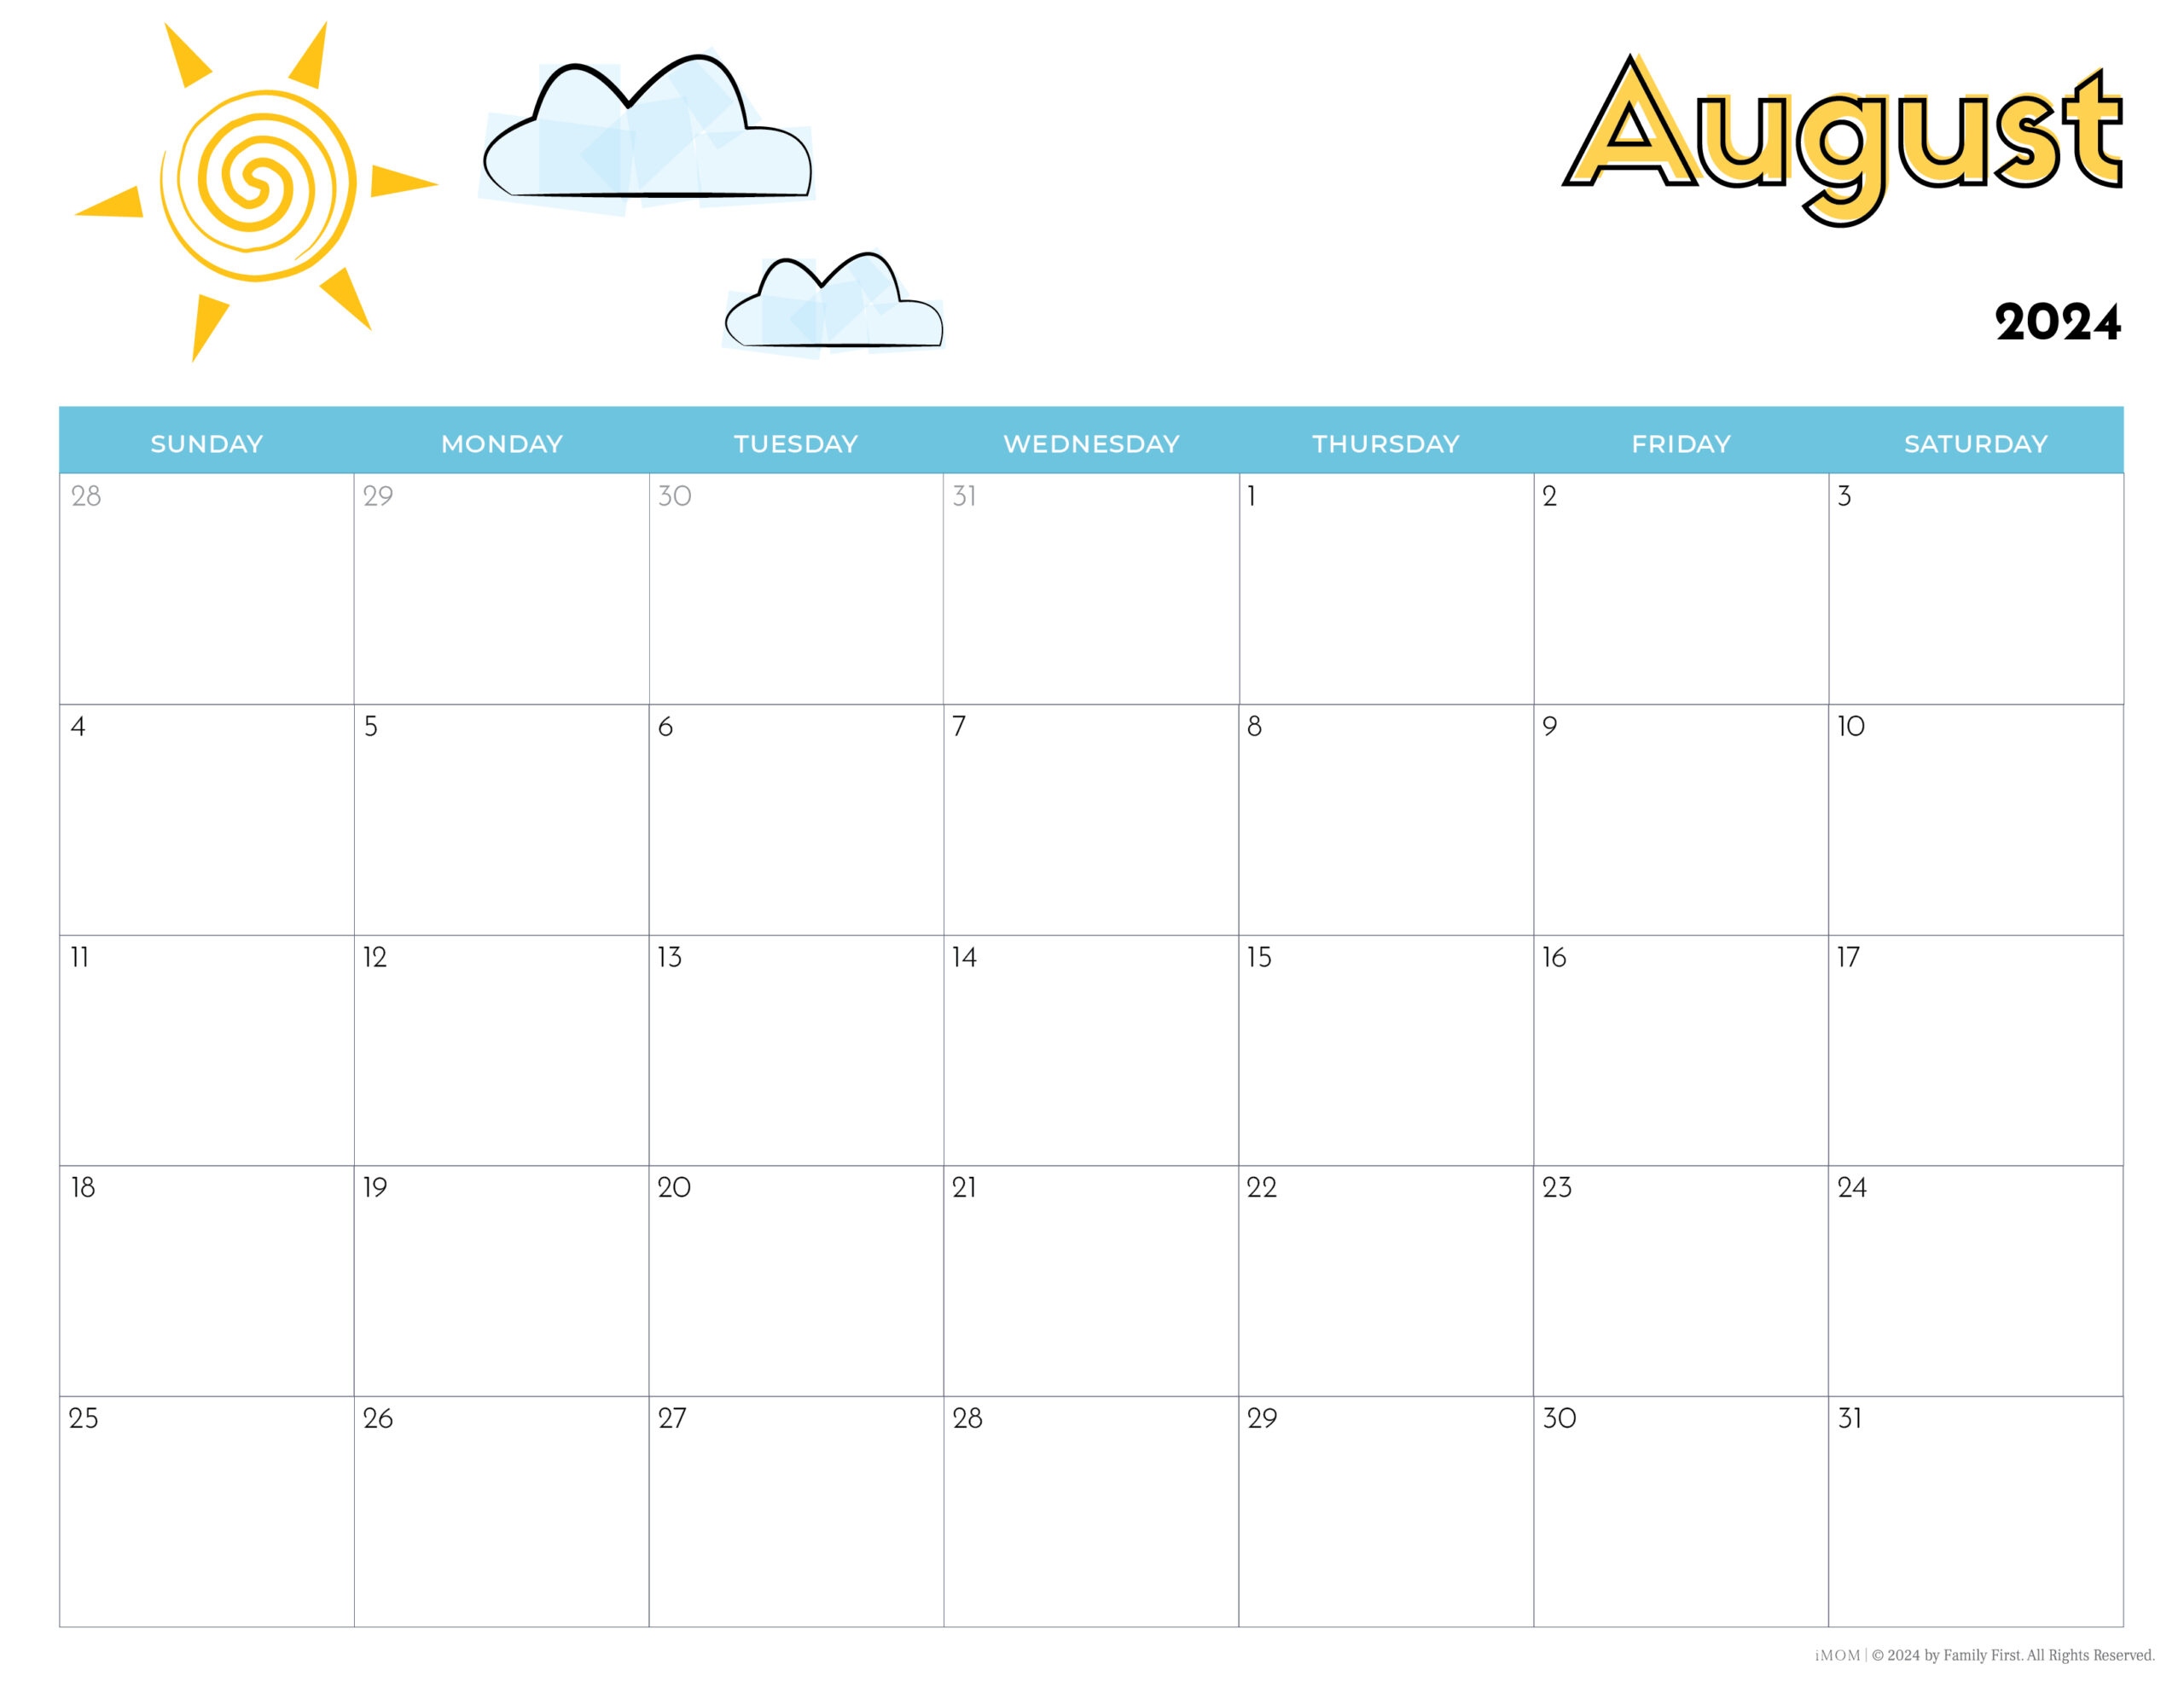 2024 Printable Calendars For Kids - Imom within Free Printable Calendar 2024 Kids